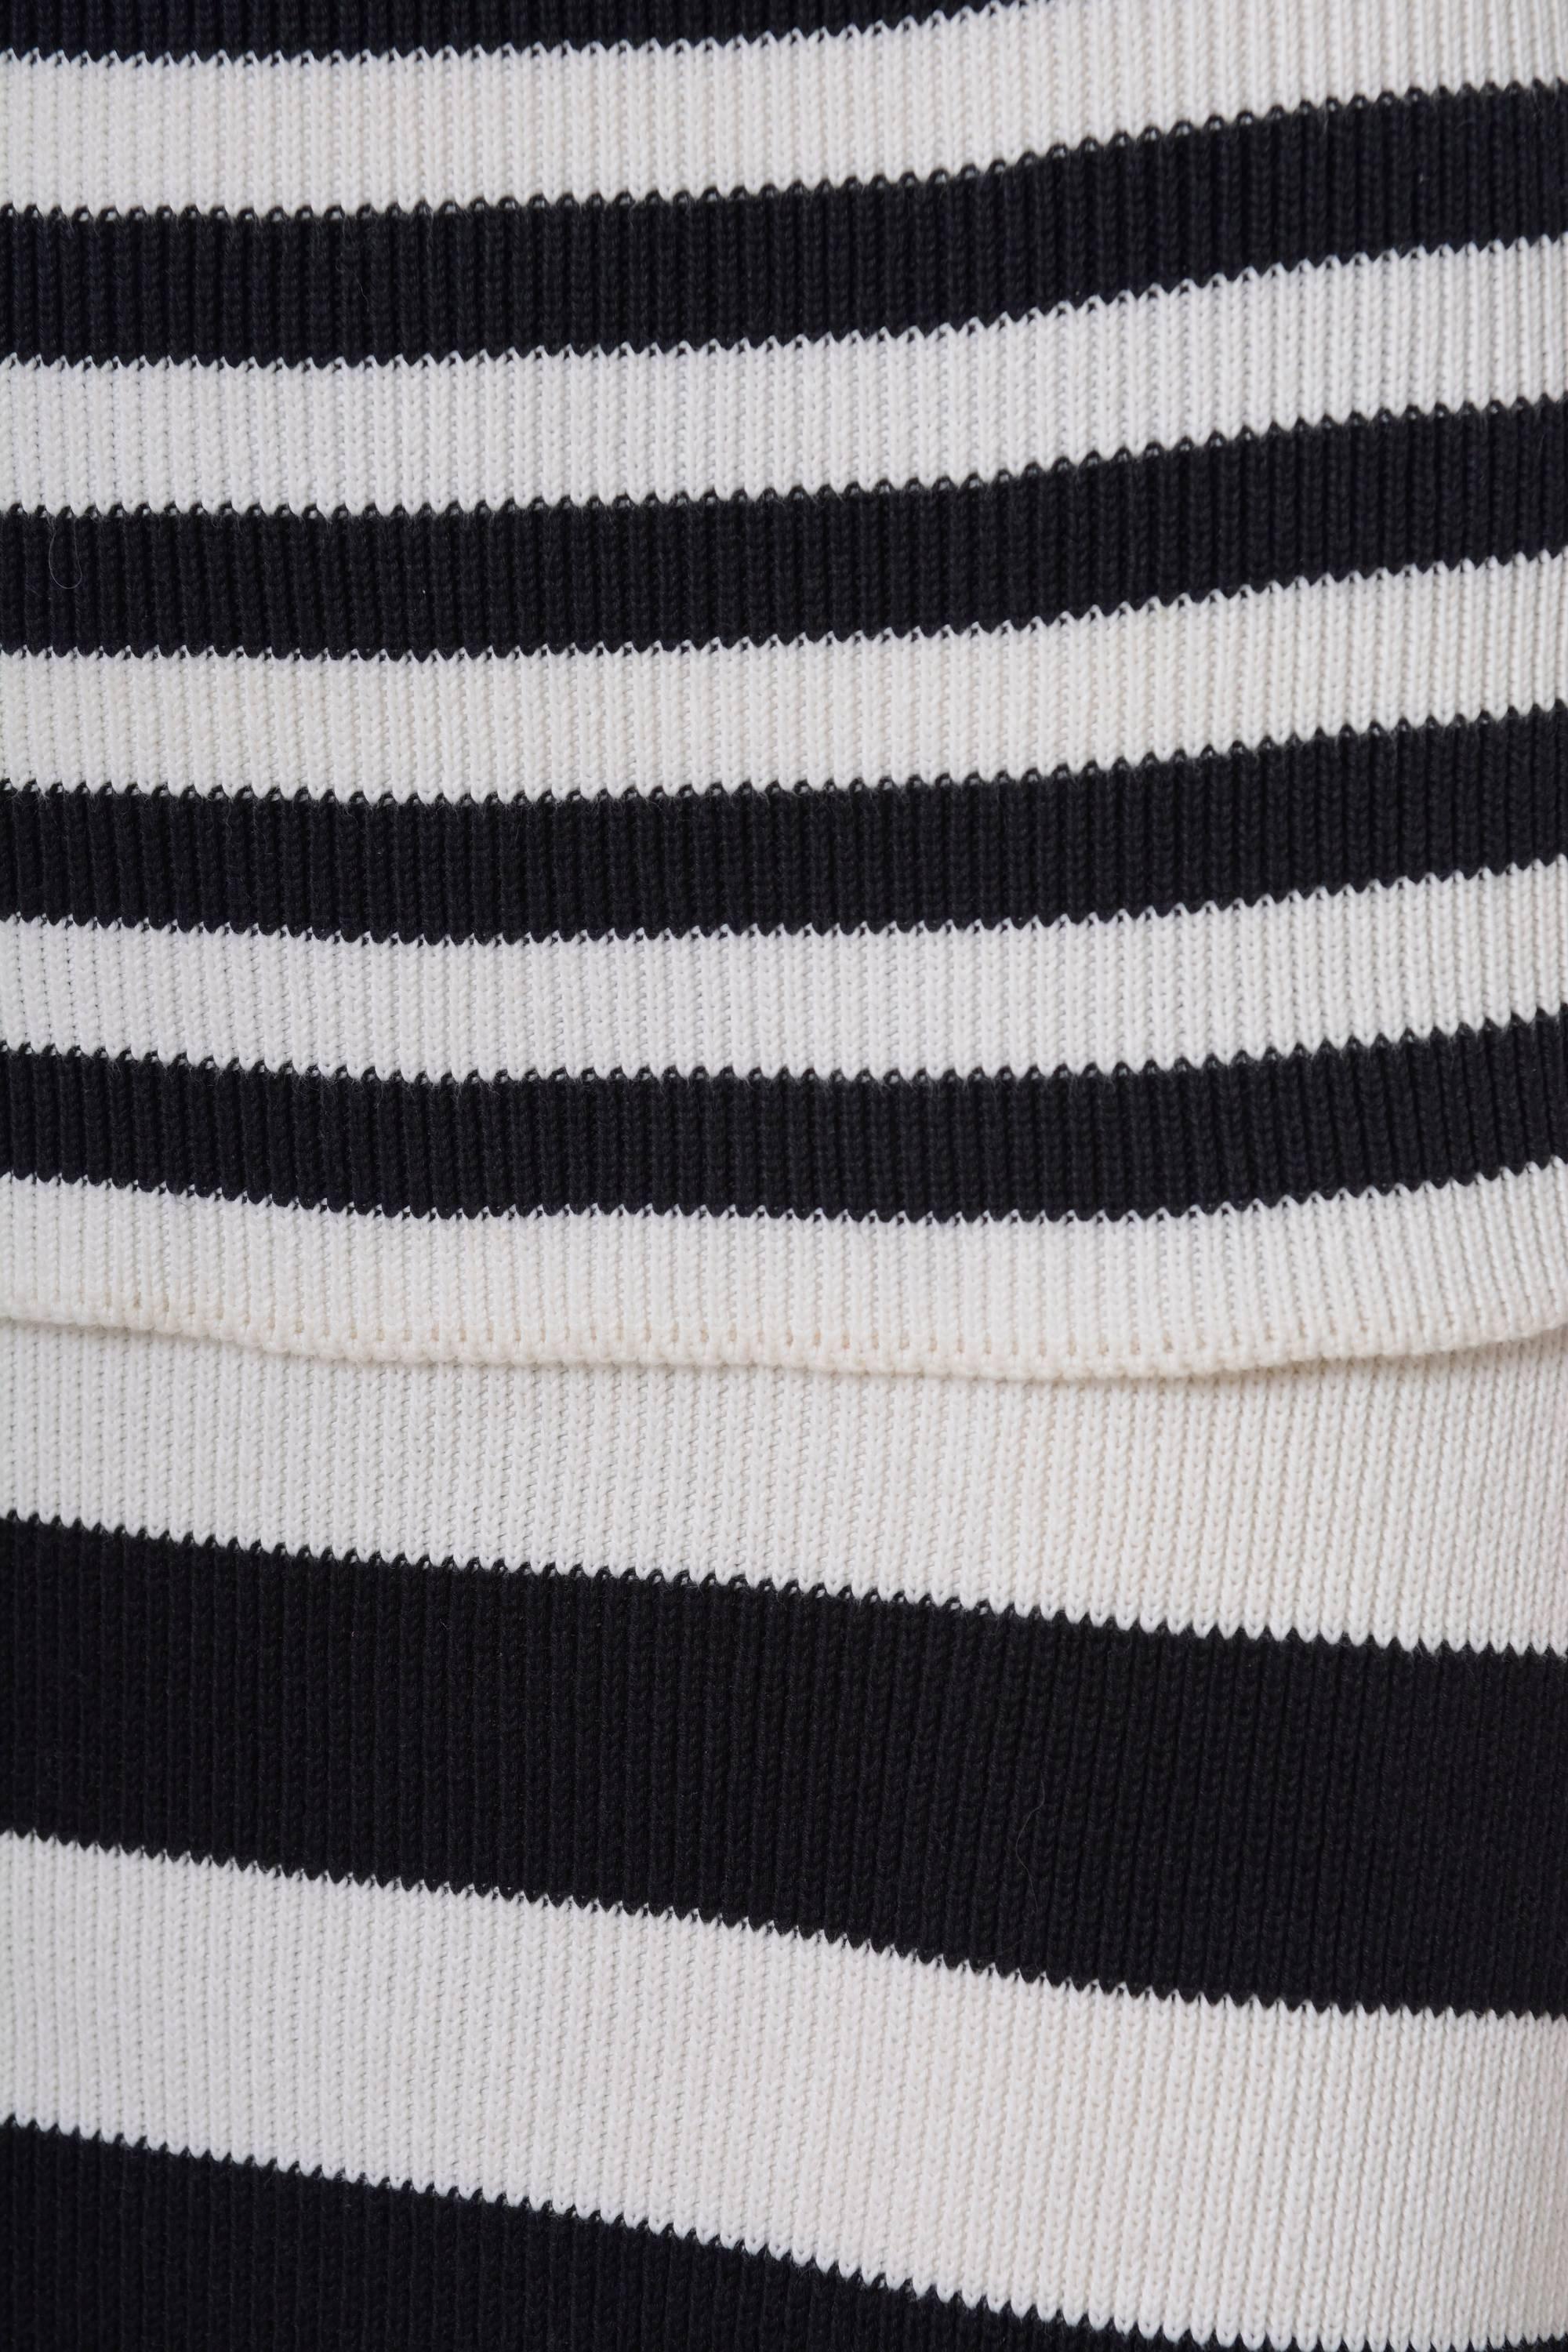 Salvatore Ferragamo Striped Black and White Jersey Sweater and Skirt In Excellent Condition For Sale In Milan, Italy